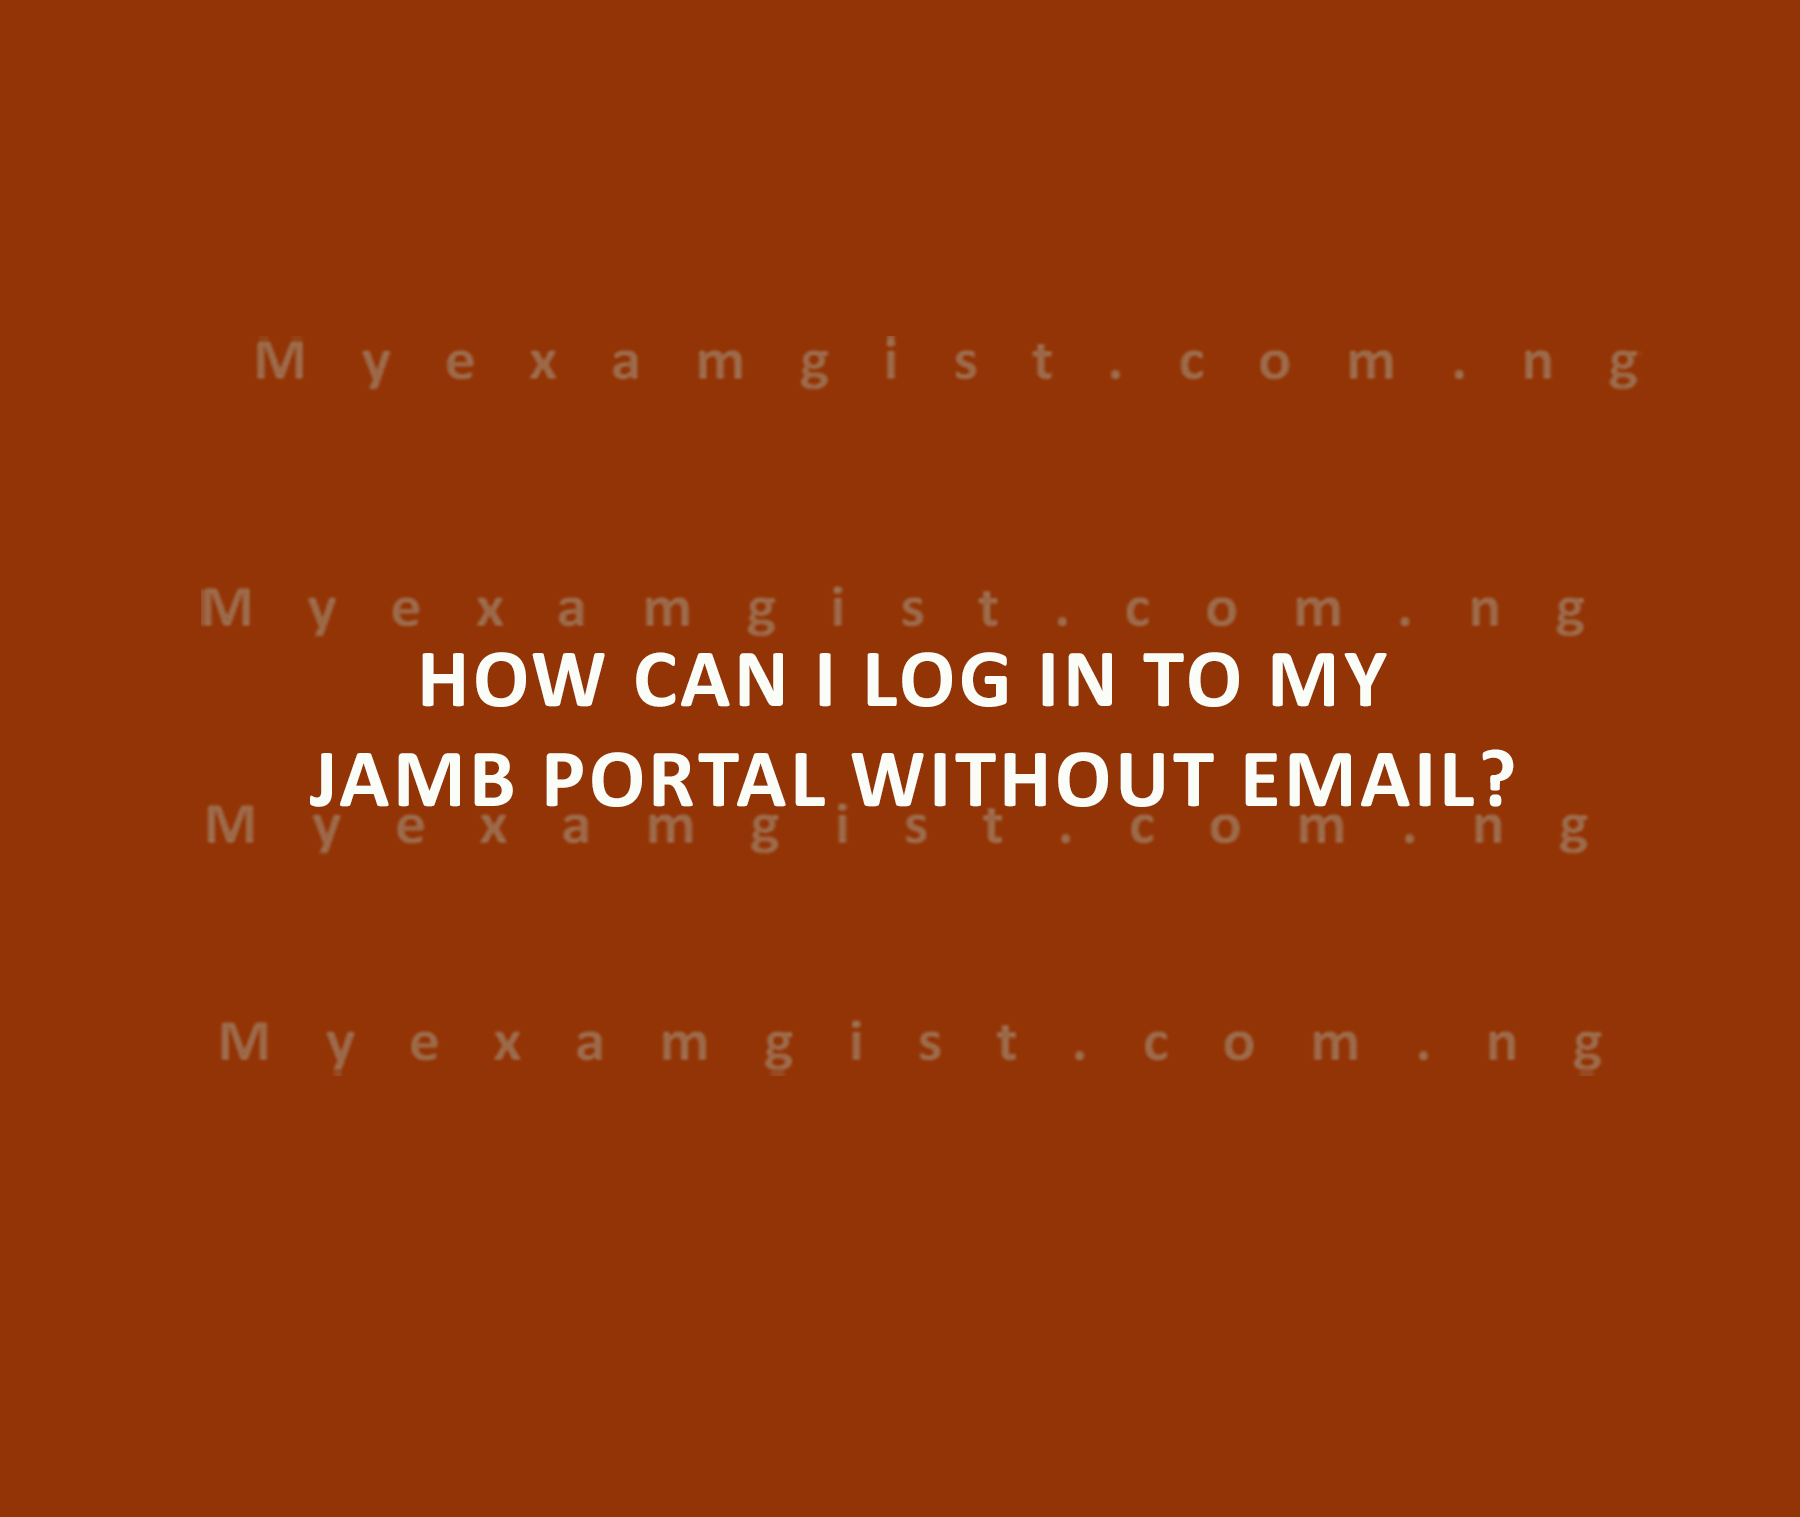 How can I log in to my JAMB portal without email?